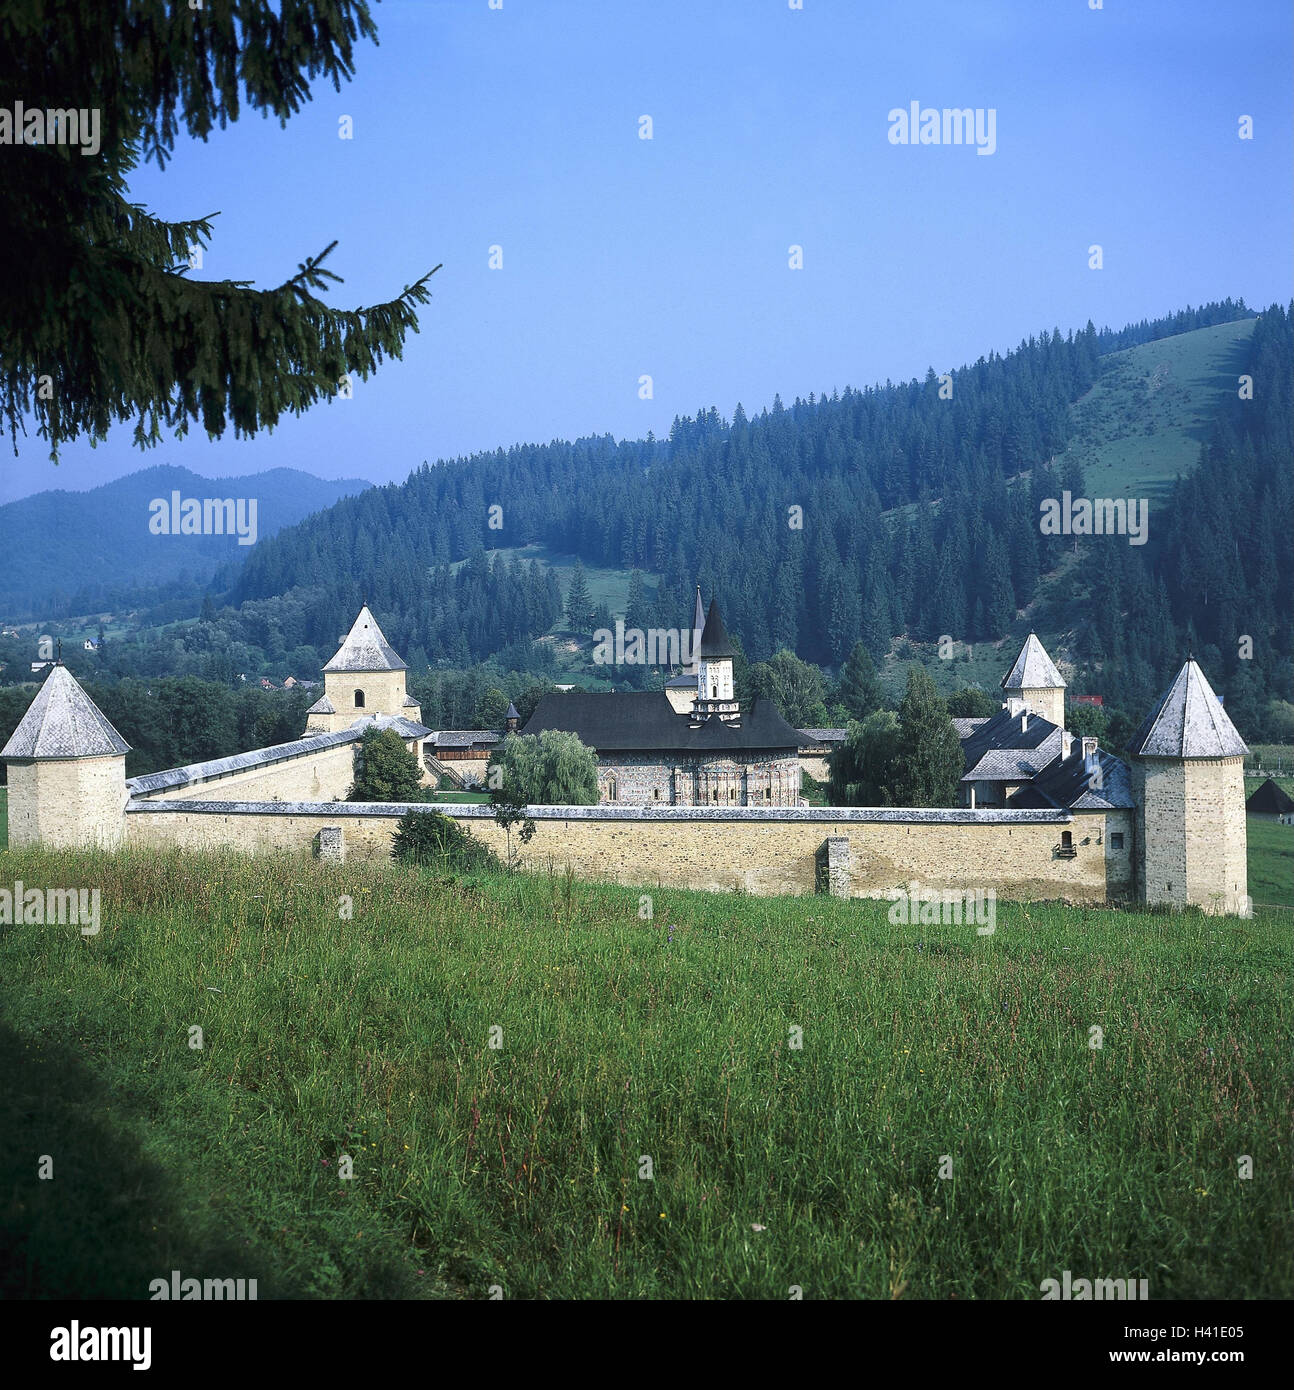 Romania, Bukovina, Sucevita, cloister, in 1581, military defensive wall, view, Southeast, Europe, Bucovina, Bucowina, Bukovina, convent, cloister building, cloister plant, defensive wall, corner towers, architectural style, culture, place of interest, arc Stock Photo